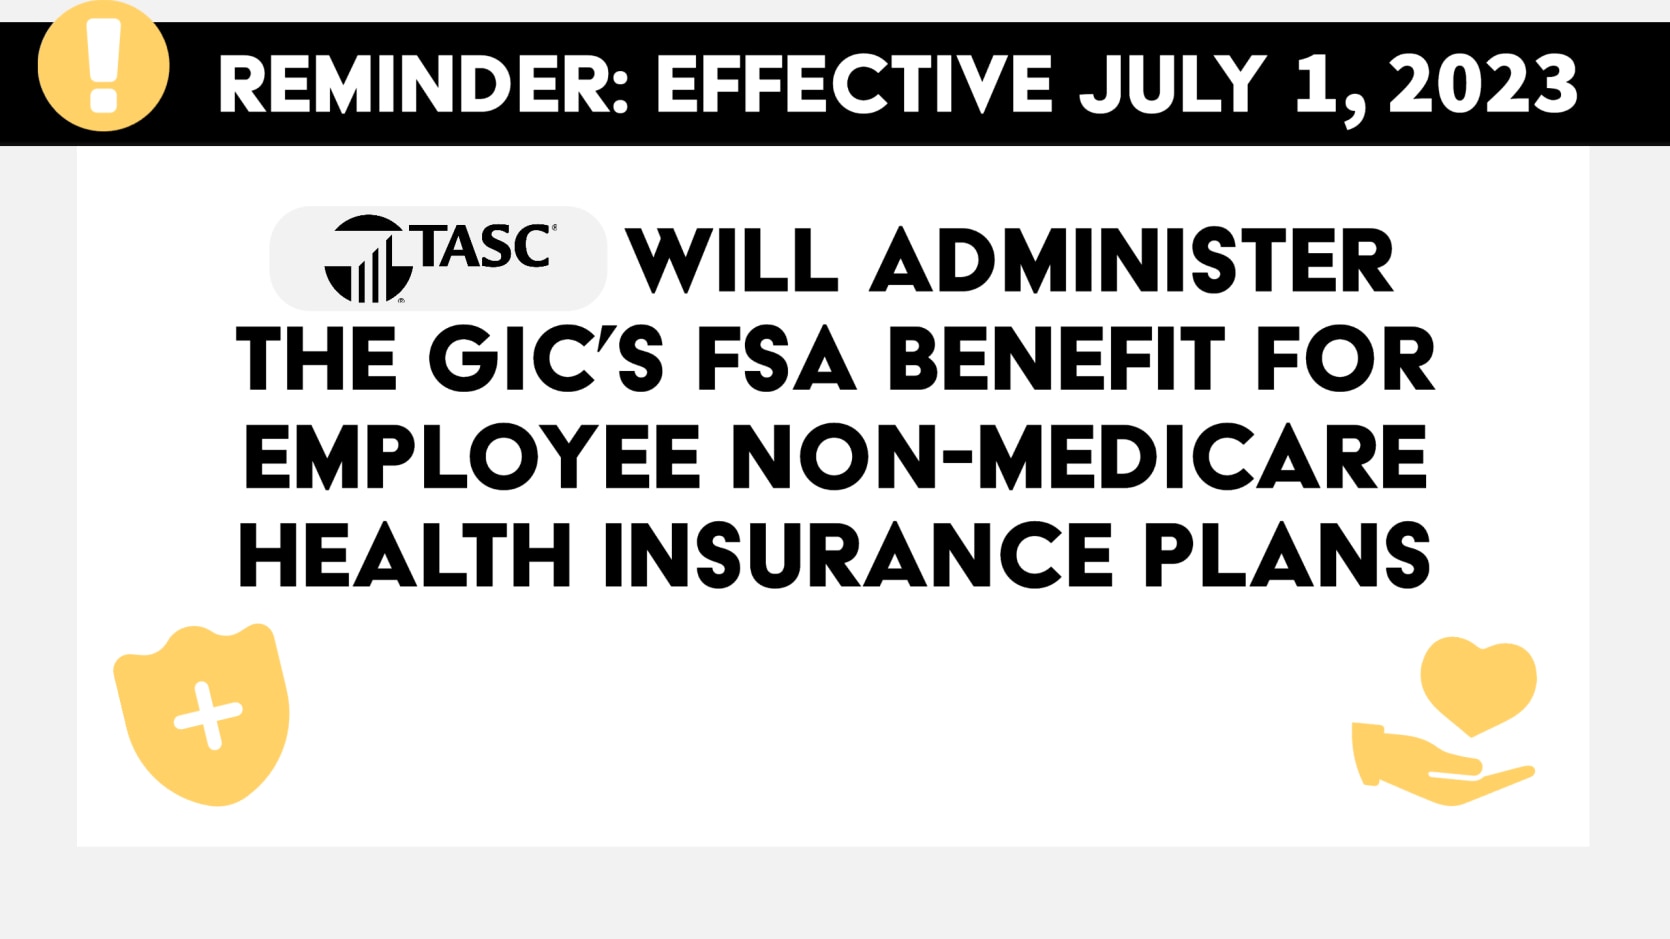 TASC will administer the GIC's FSA benefit for state employees effective July 1, 2023